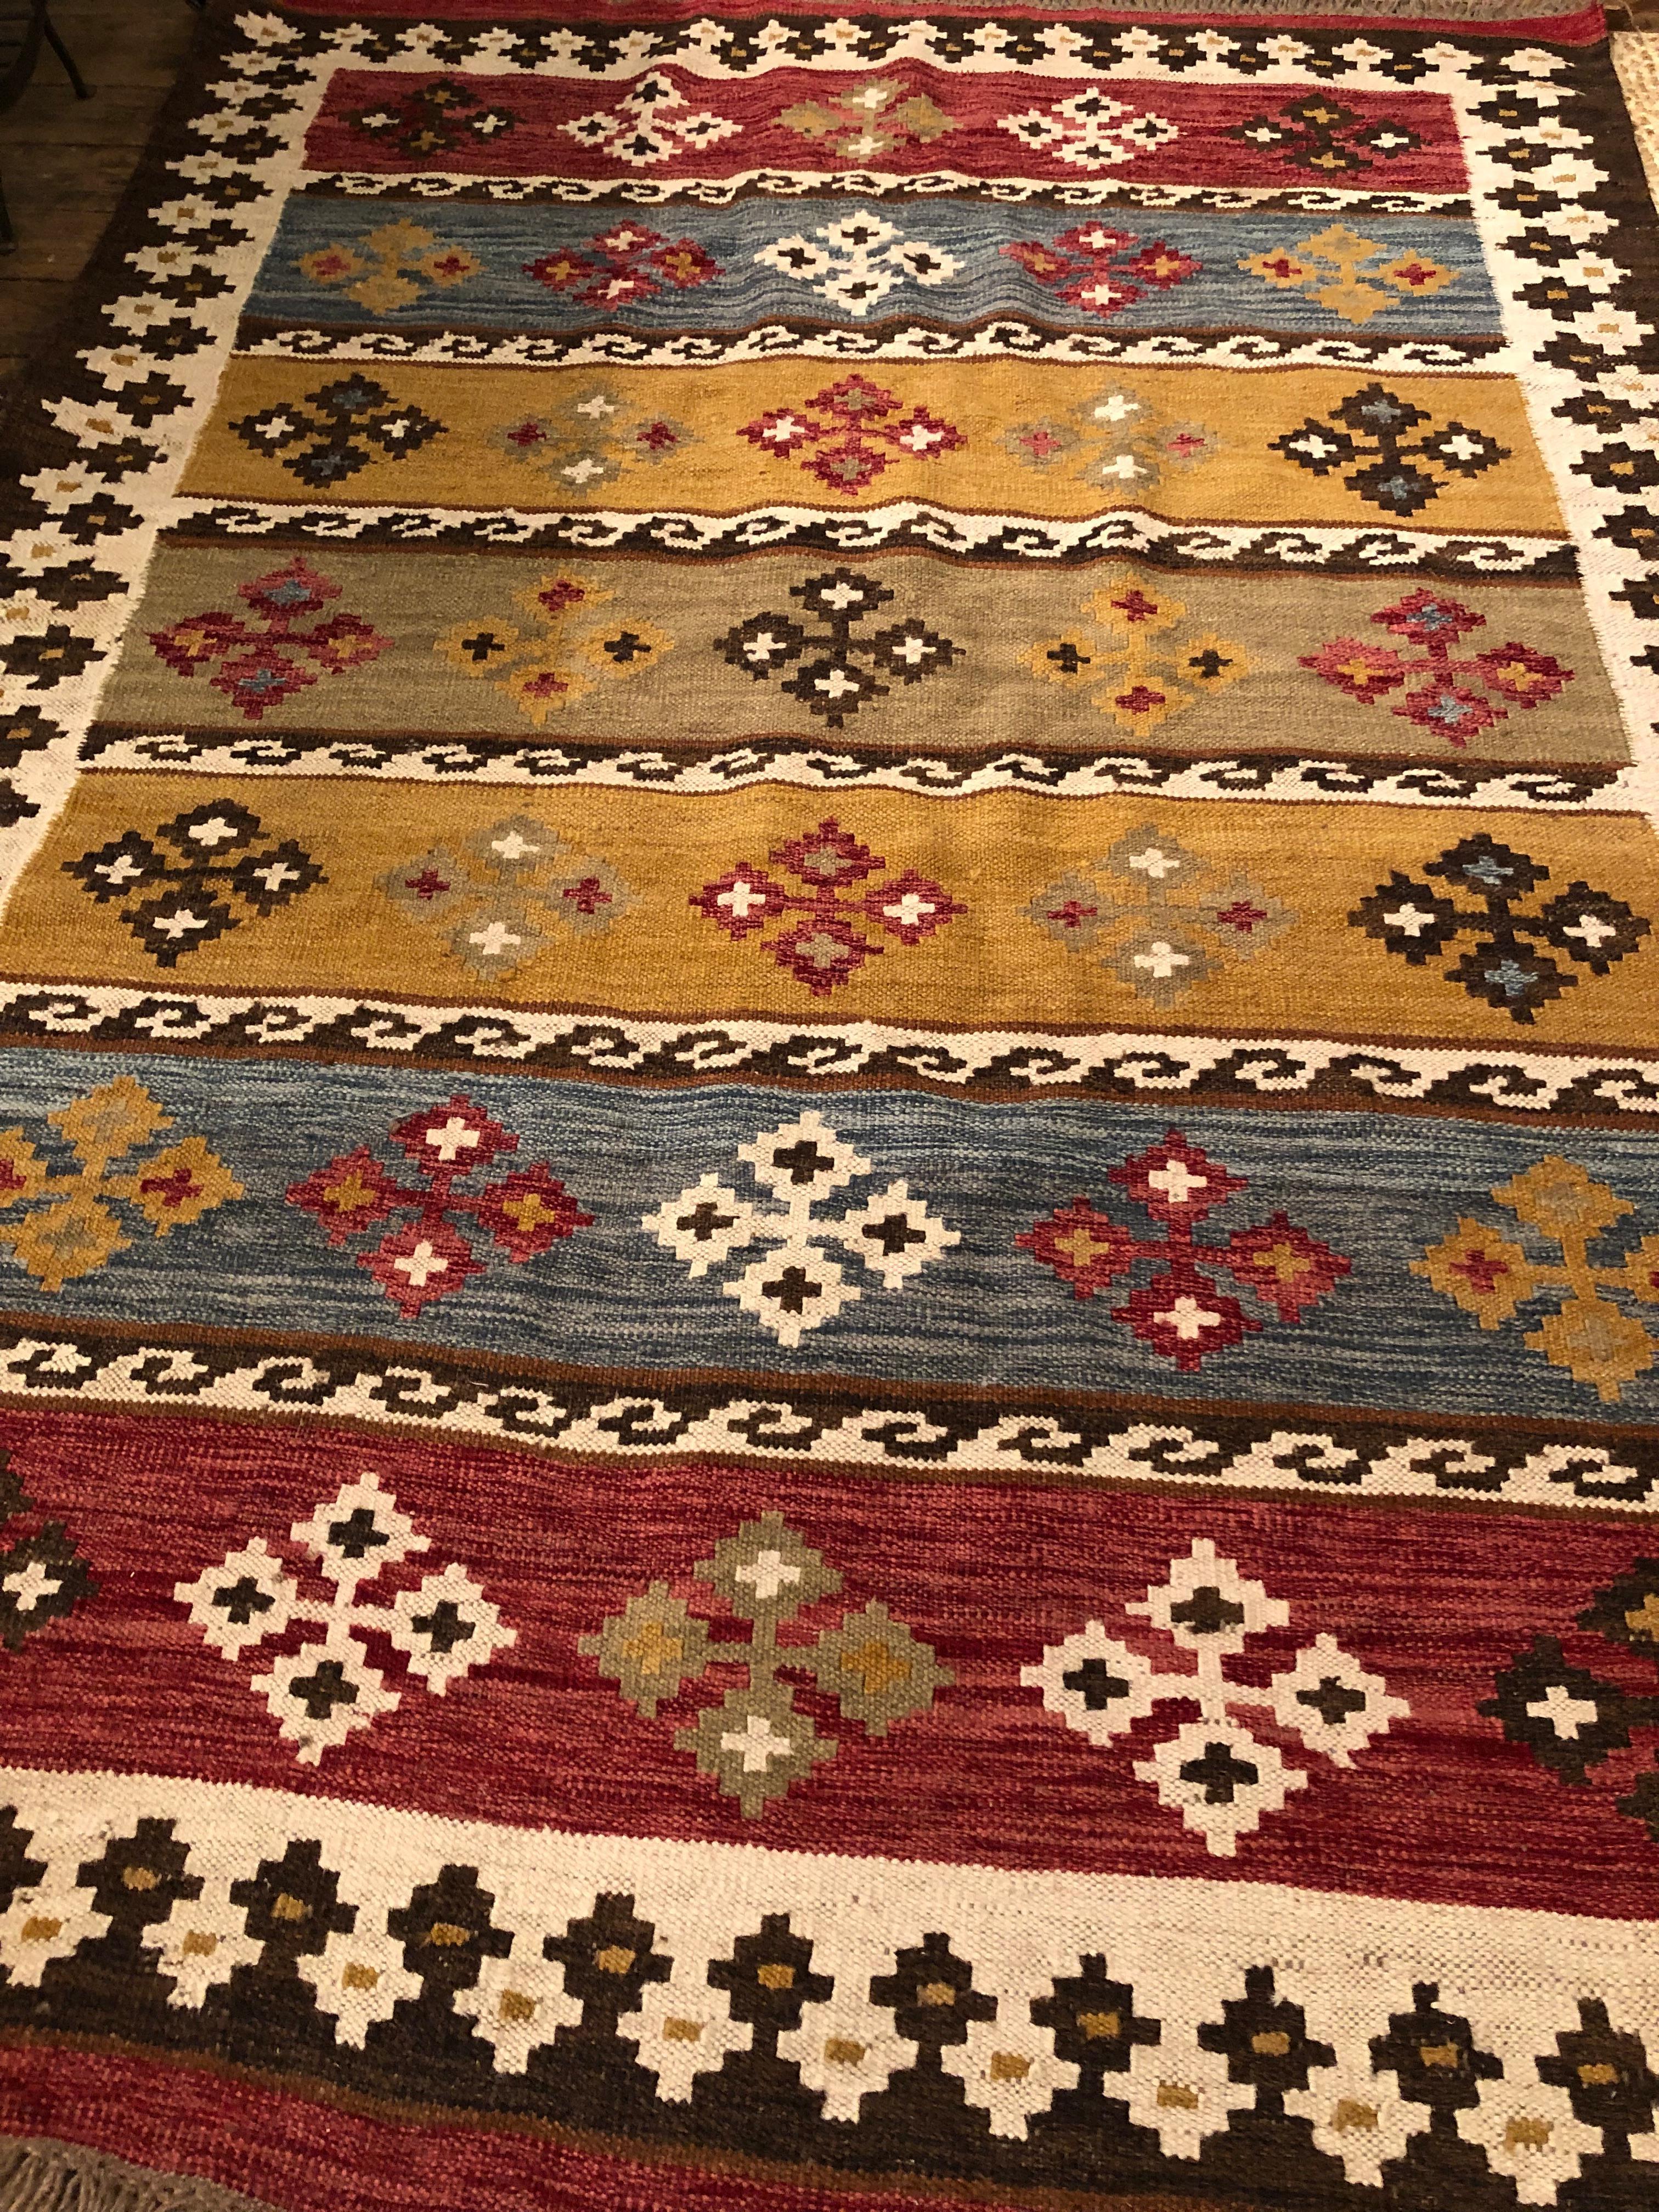 A gorgeous vintage kilim rug, newly cleaned, having warm combination of rust, mustard, brown, blue and cream color palette.